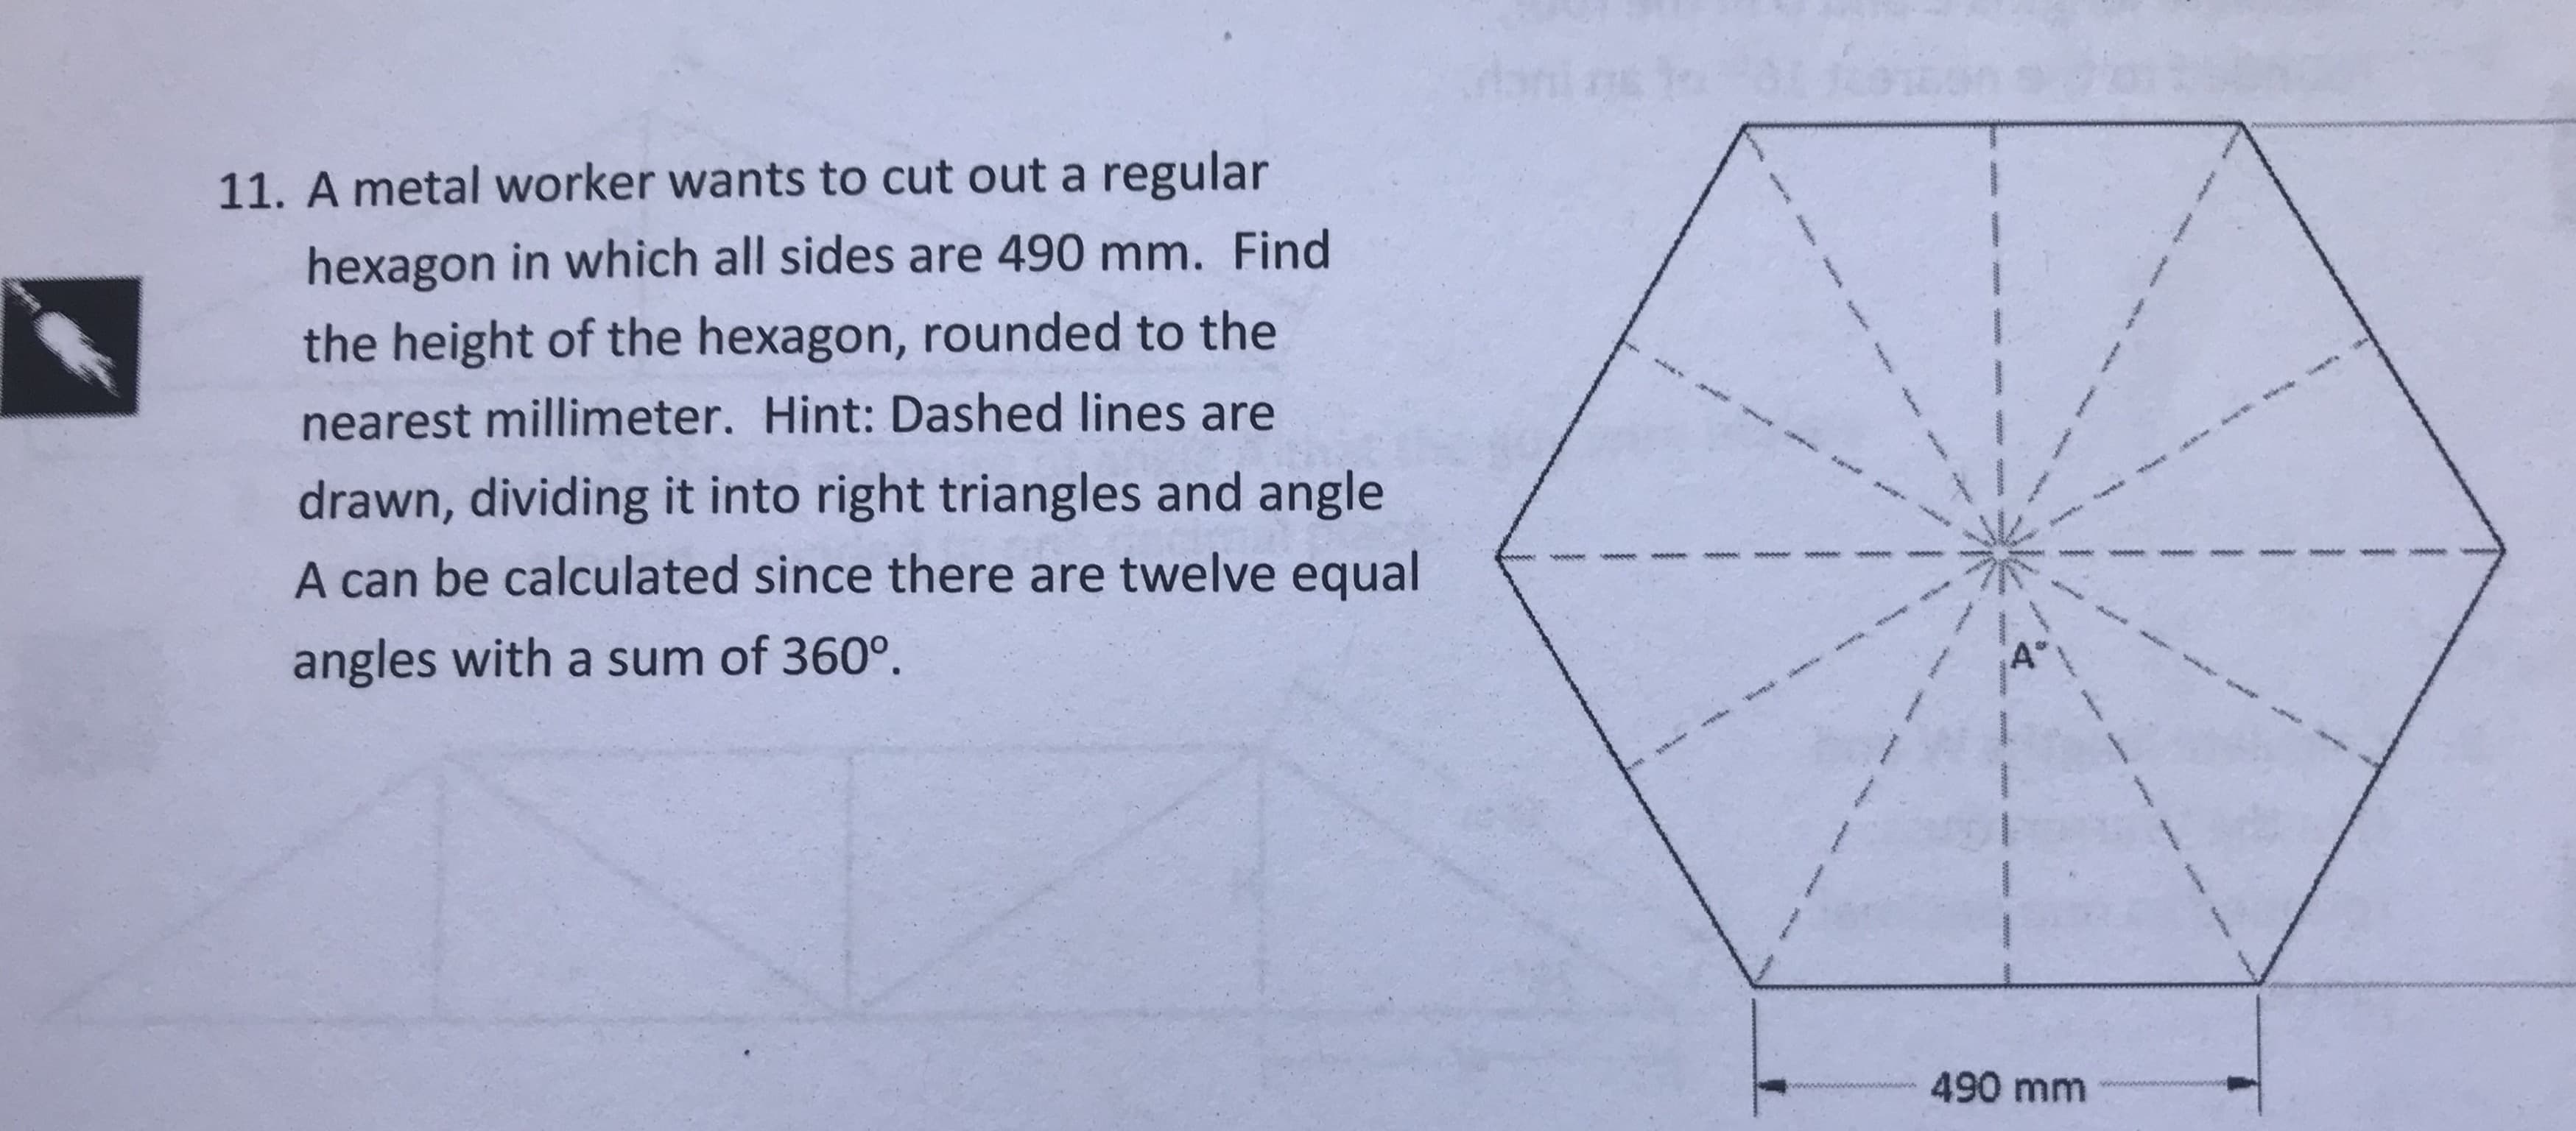 11. A metal worker wants to cut out a regular
hexagon in which all sides are 490 mm. Find
the height of the hexagon, rounded to the
nearest millimeter. Hint: Dashed lines are
drawn, dividing it into right triangles and angle
A can be calculated since there are twelve equal
angles with a sum of 360°
490 mm
